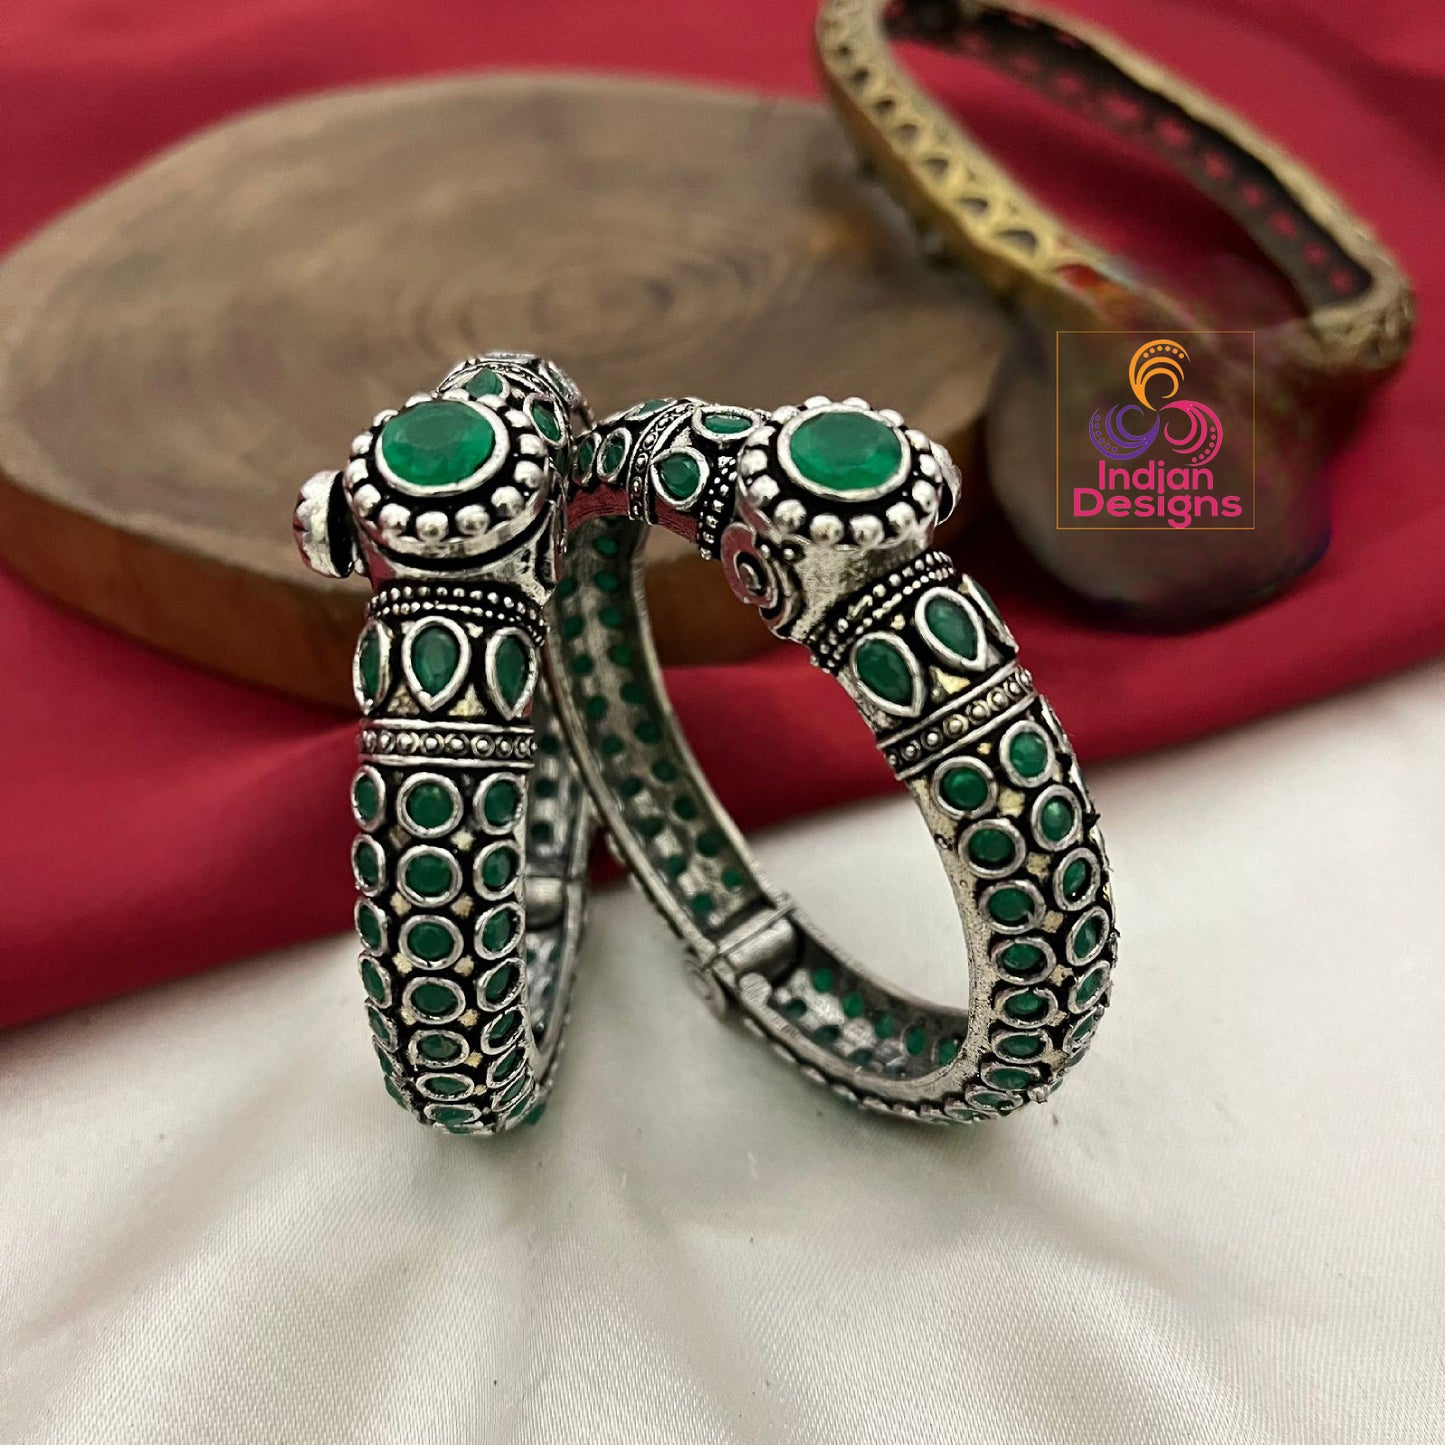 Pair of Oxidized Silver Openable Kada-Bracelet size 2.6 | Antique style Multicolor Stone German Silver bangles |Indian Jewelry |Gift for her